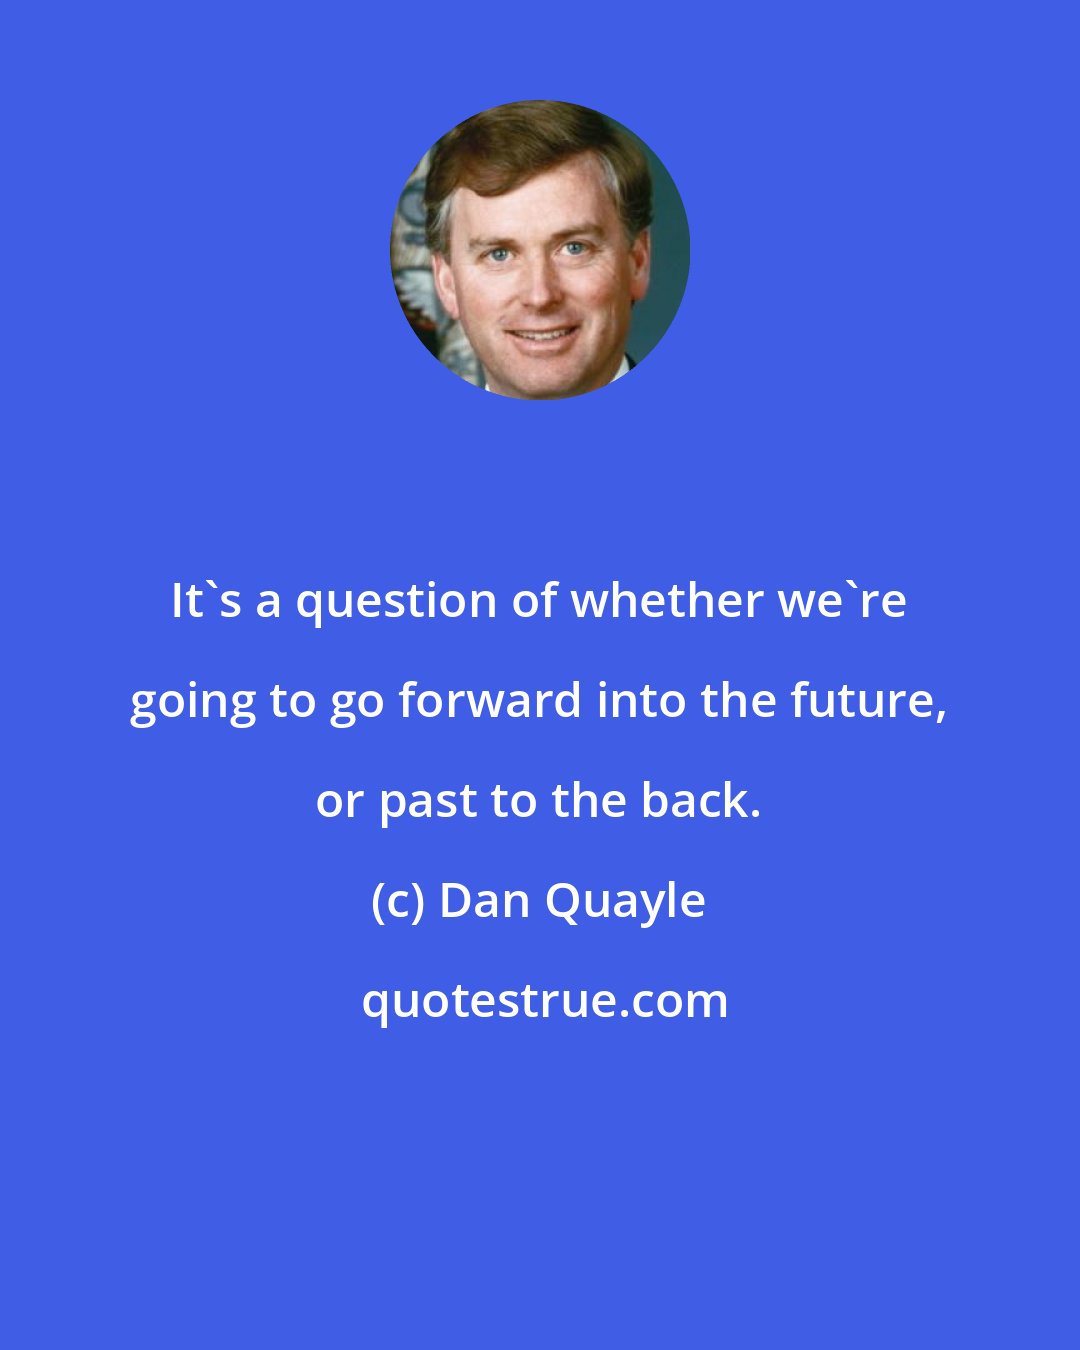 Dan Quayle: It's a question of whether we're going to go forward into the future, or past to the back.